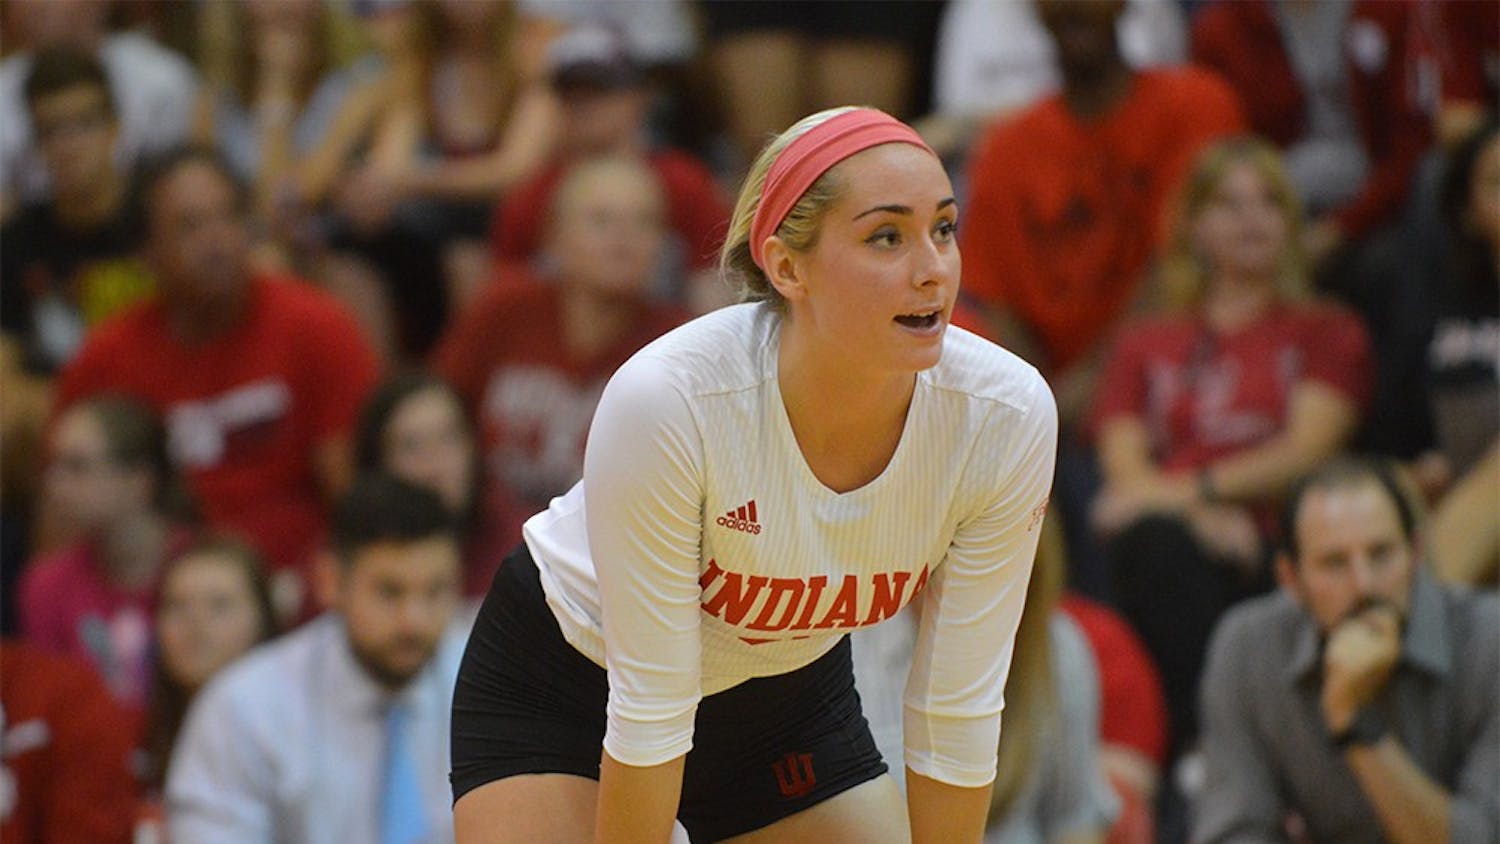 Senior Taylor Lebo prepares for the ball to go into play in the game against Purdue on Oct. 7. The Hoosiers lost 0-3.